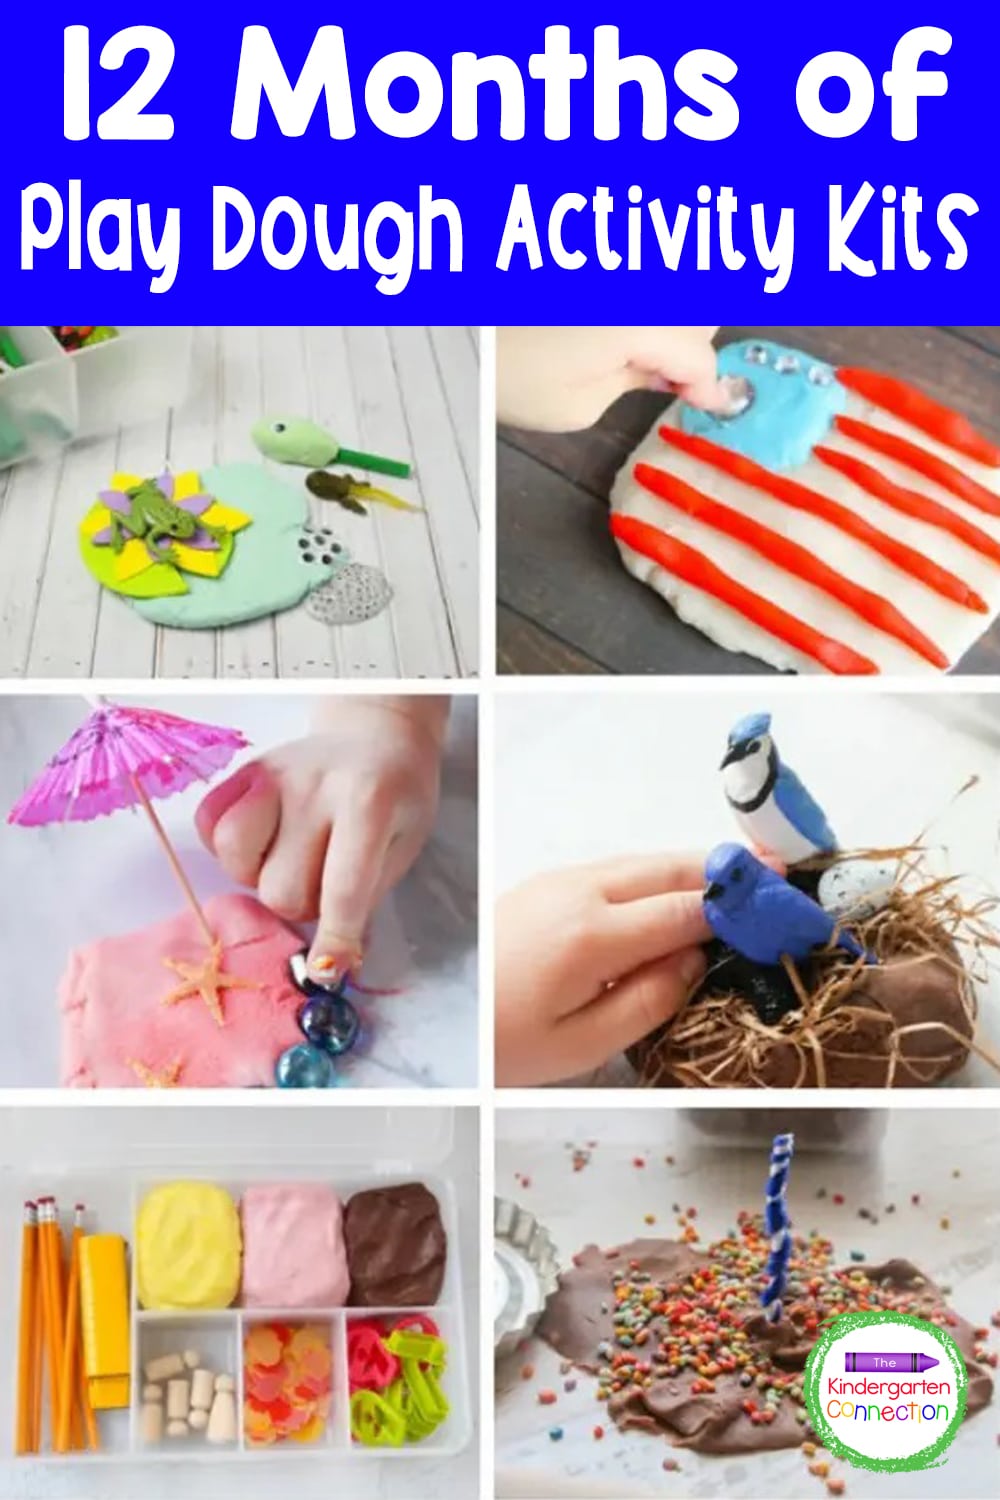 12 Months of Play Dough Activity Kits